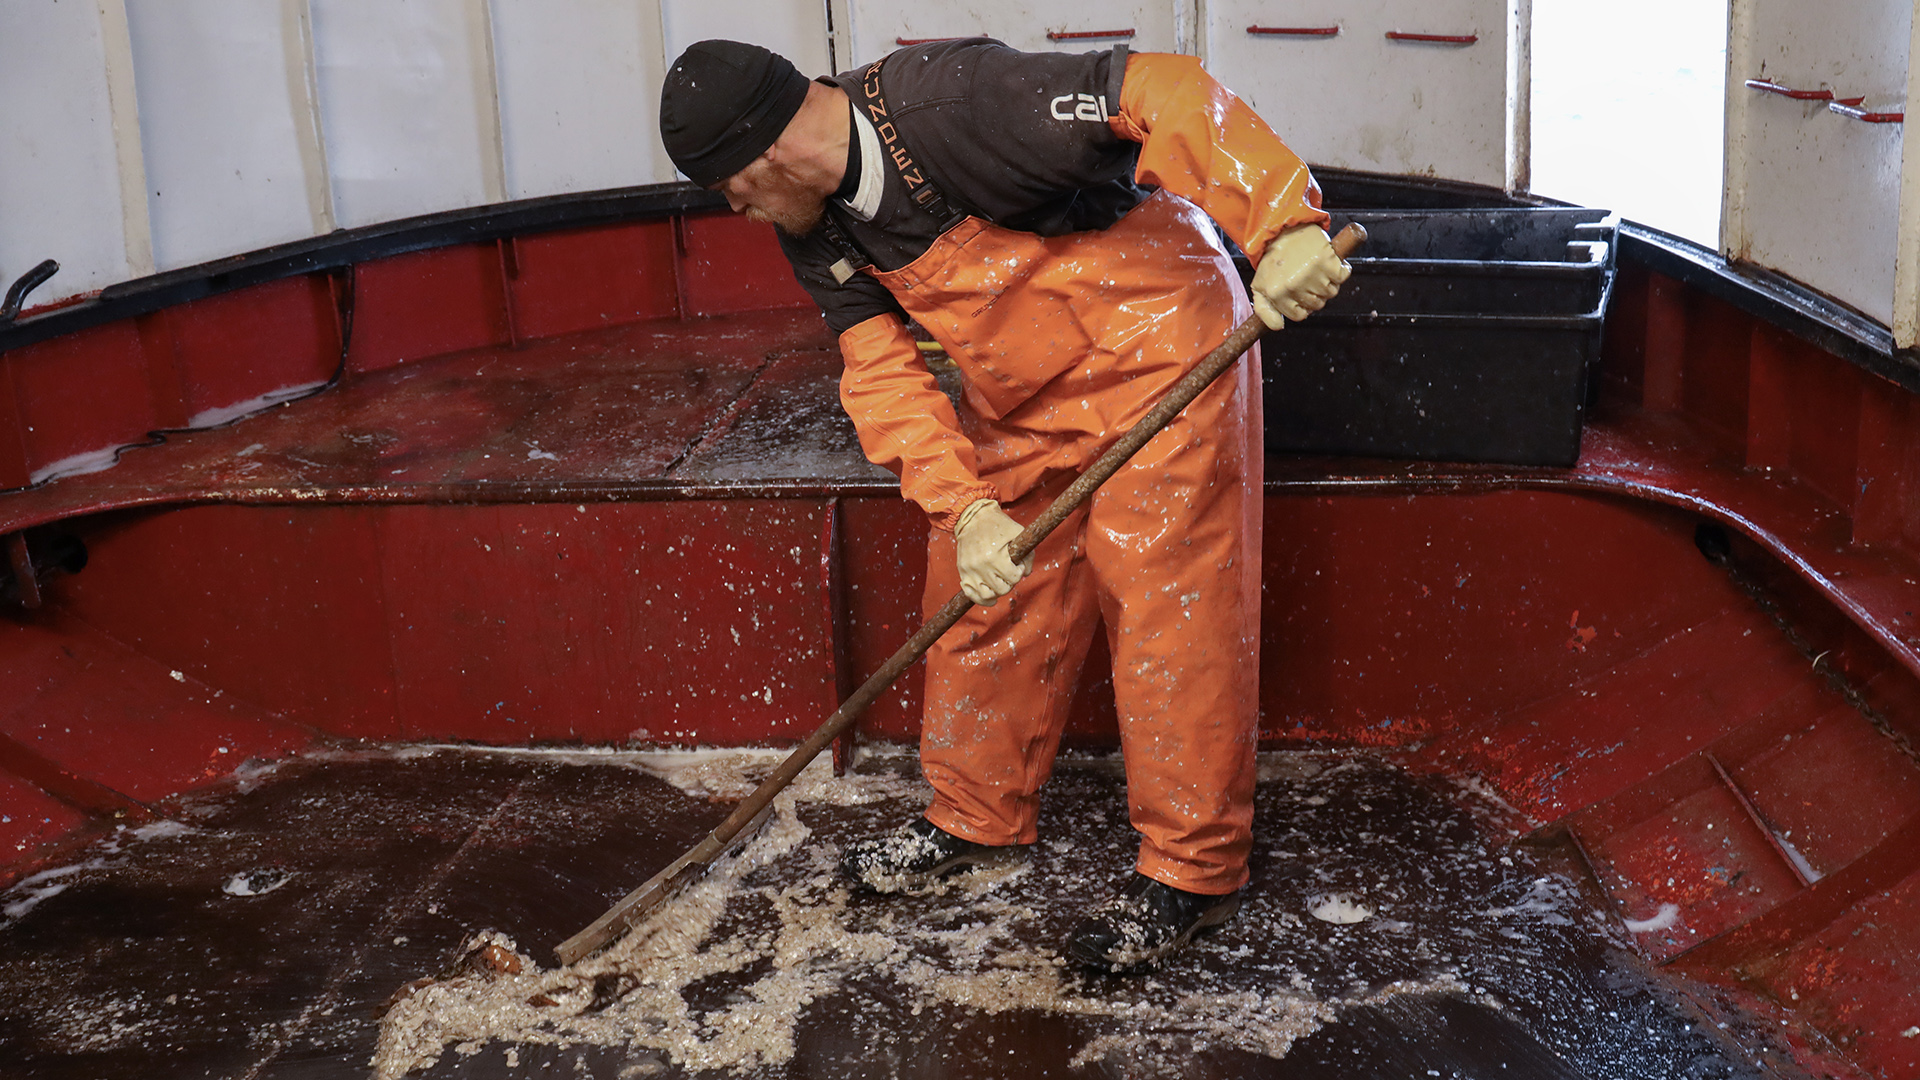 Hunter Gordon uses a mob to swab fish scales from the floor of a fishing boat.